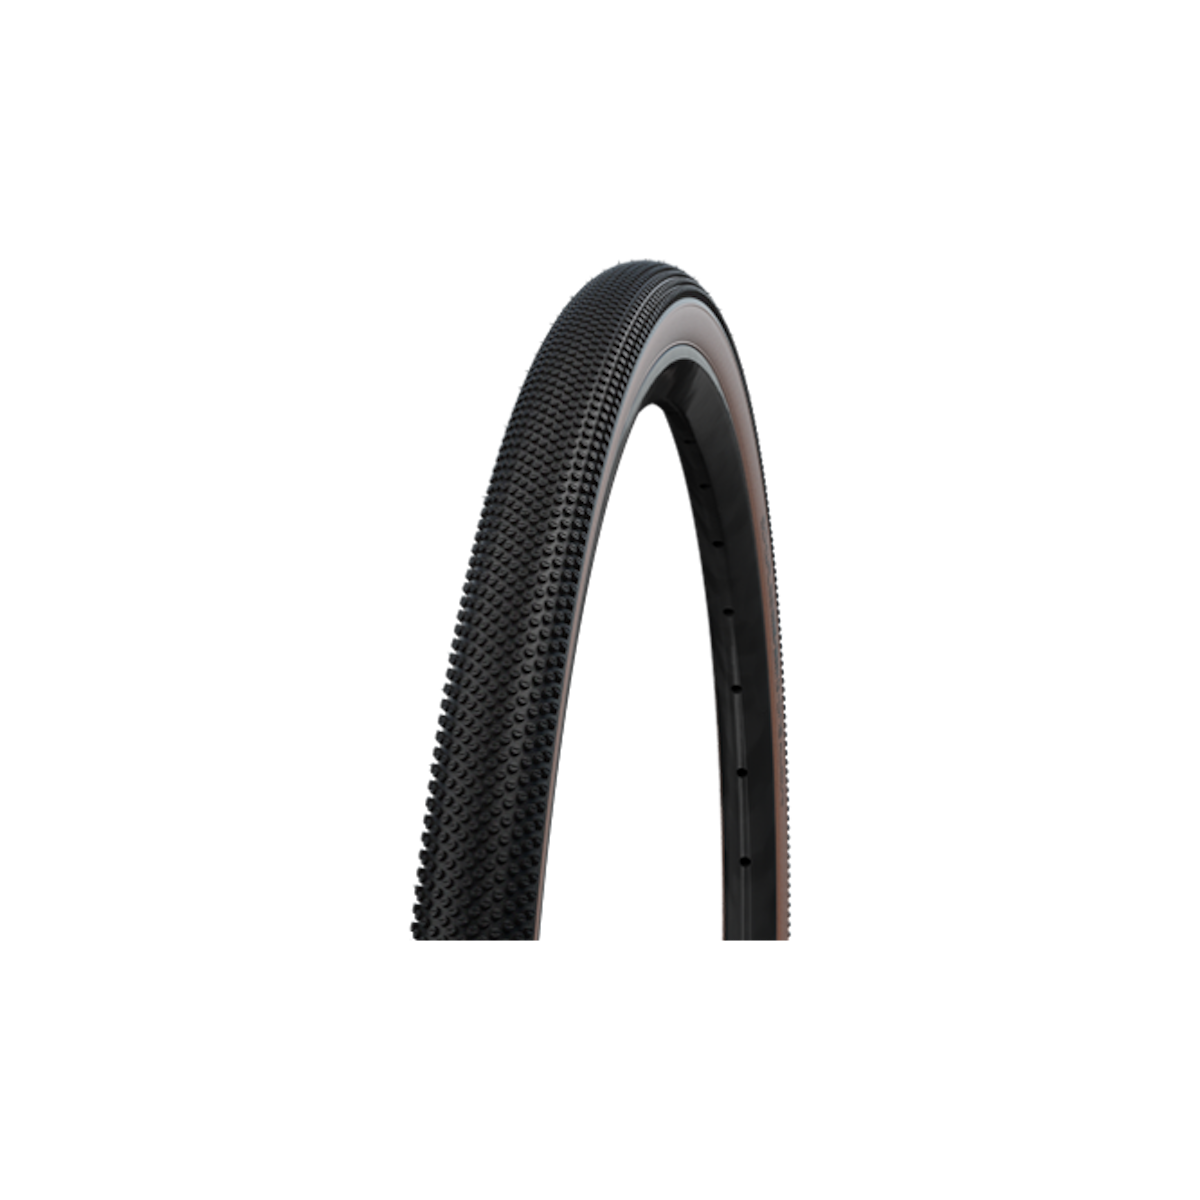 SCHWALBE G-ONE ALLROUND 700 x 35C tubeless tyre